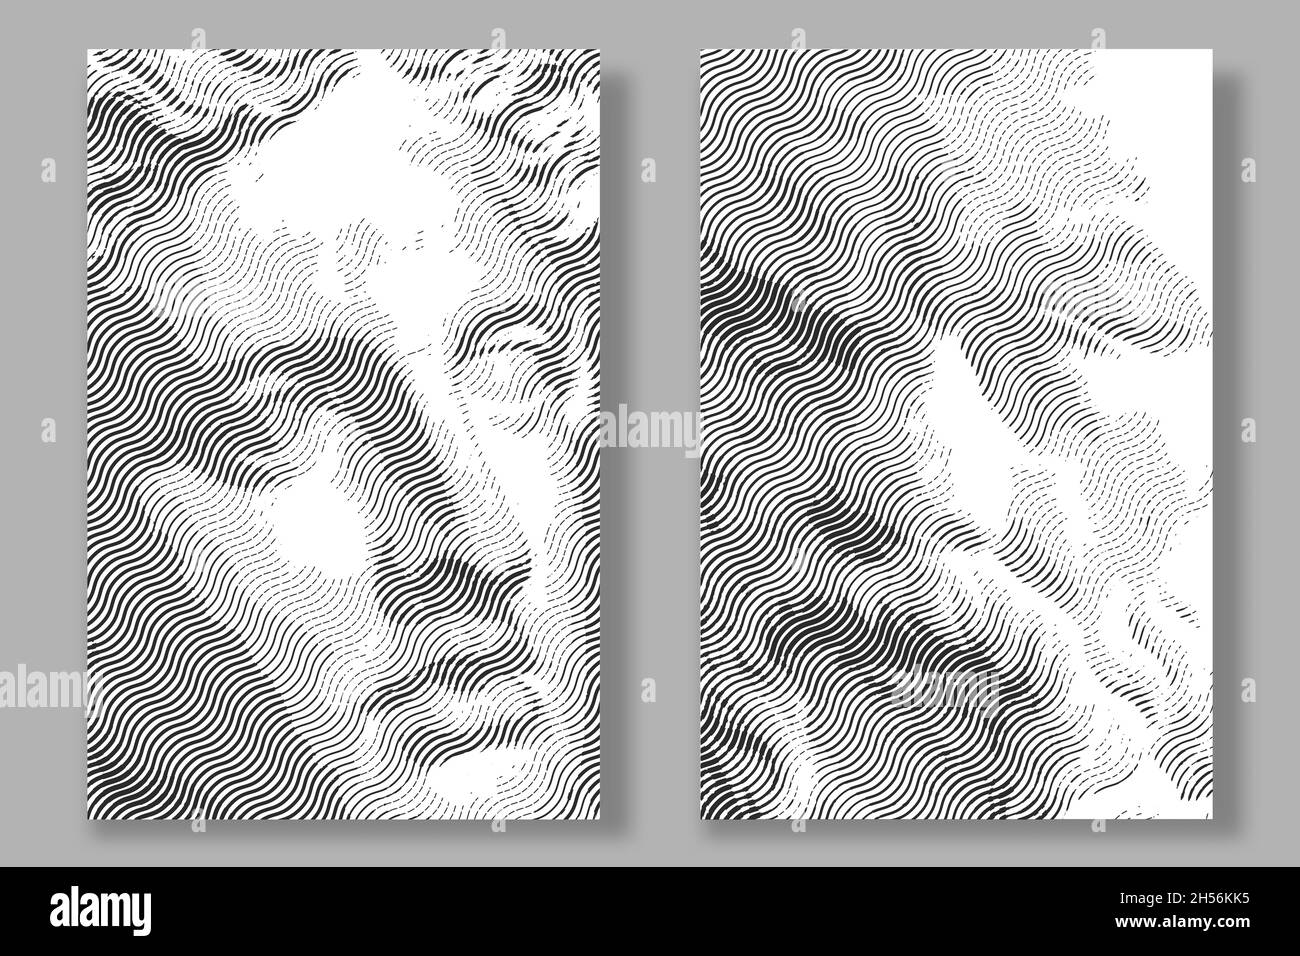 Engraved antique face. Vector illustration. Digital graphic for posters, banners, flyers, cover, historic artwork, ancient picture. Vintage engraving Stock Vector